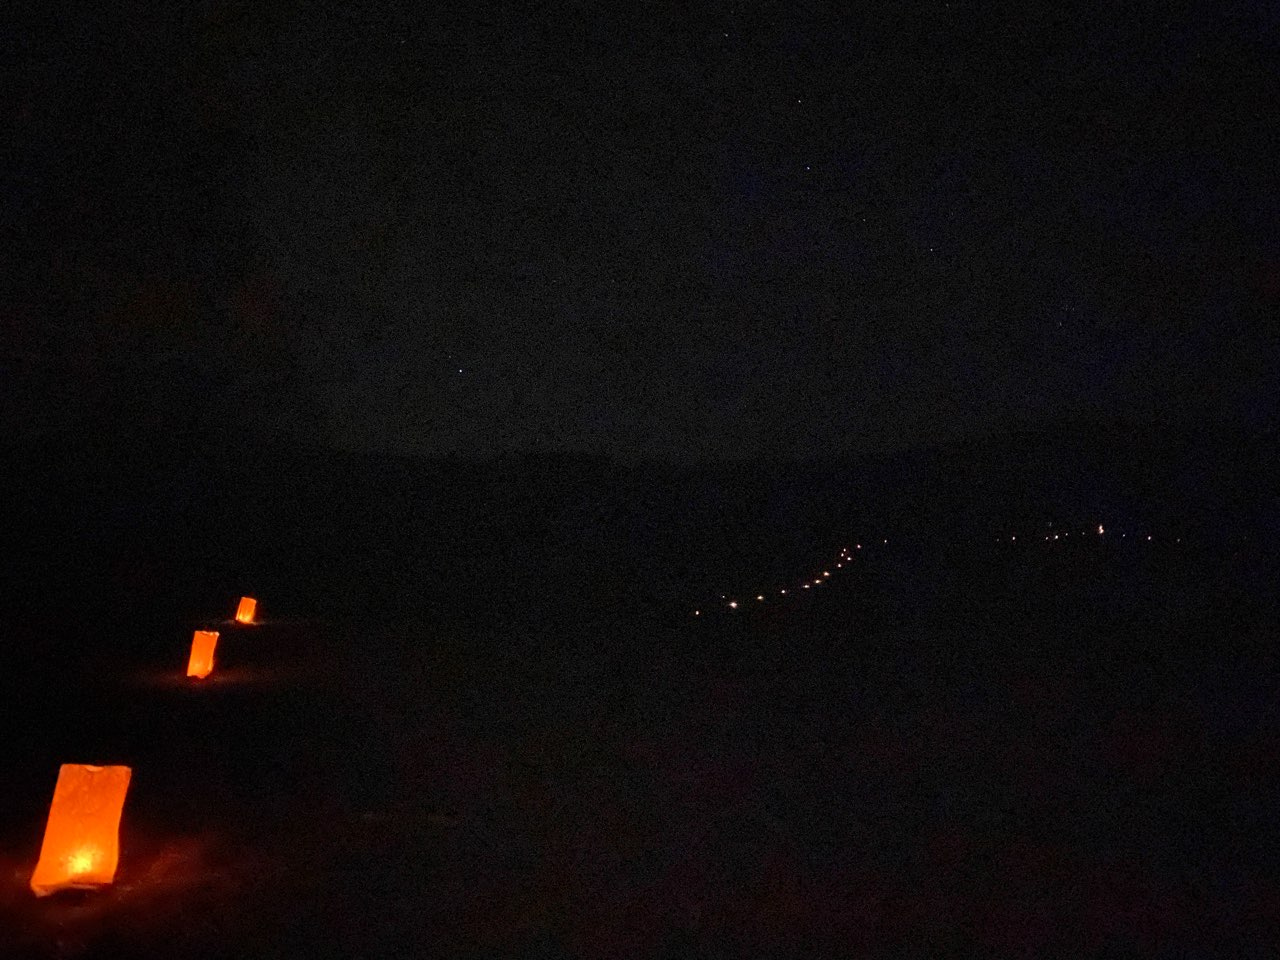 A black hillside at night with three luminarias in the foreground and numerous snaking off into the darkness over the hill in the background.